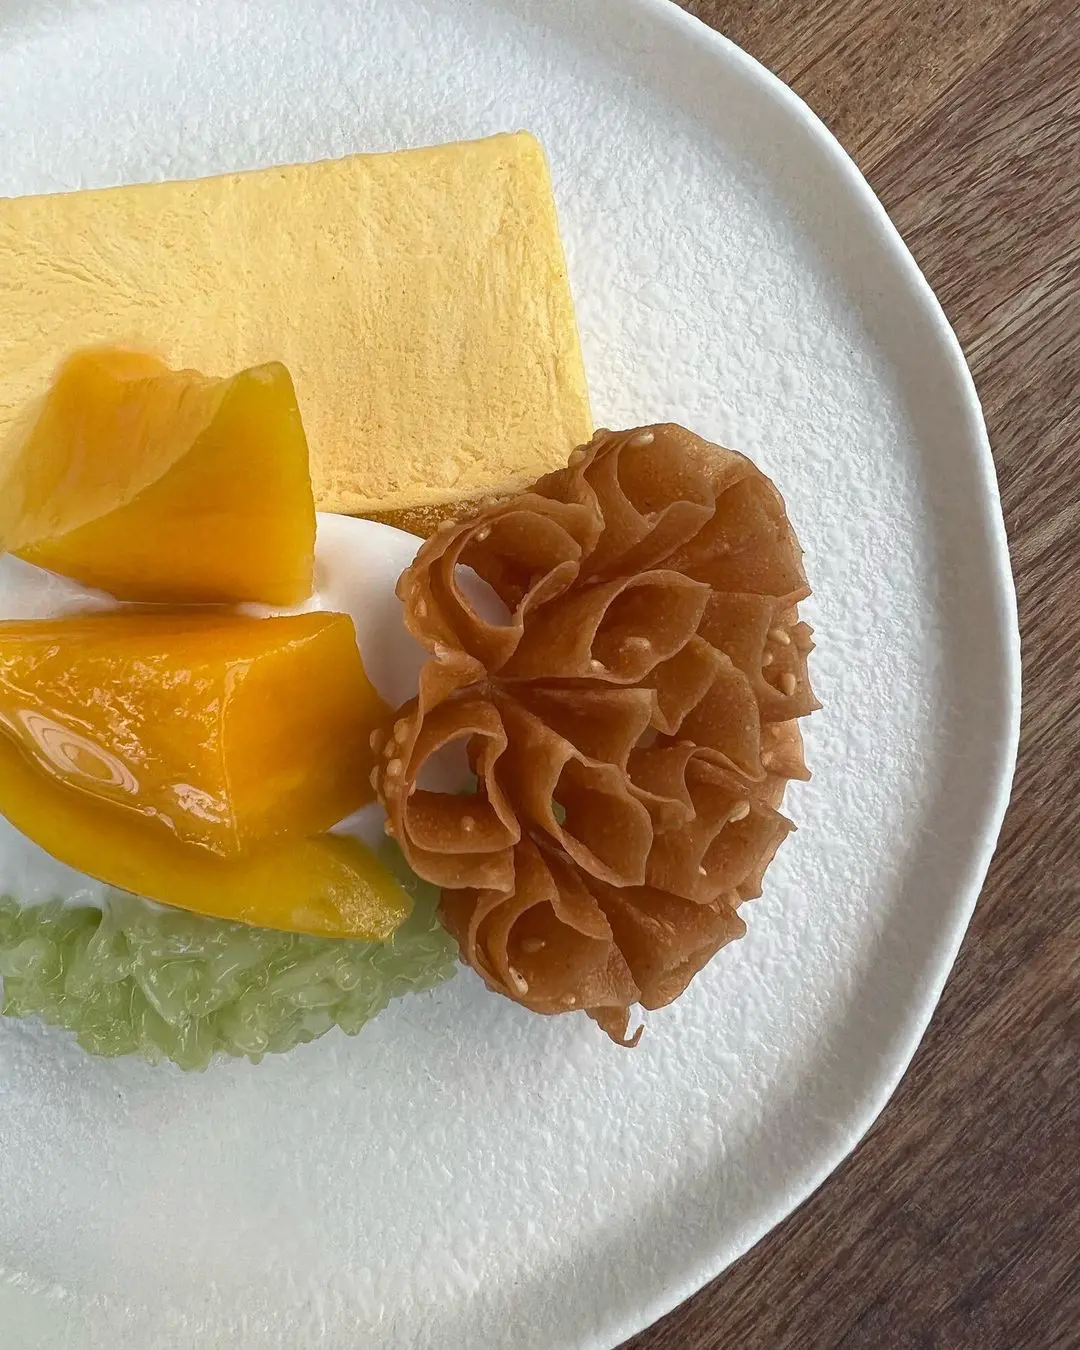 mango parfait, sweetened young (green) rice and lotus biscuit